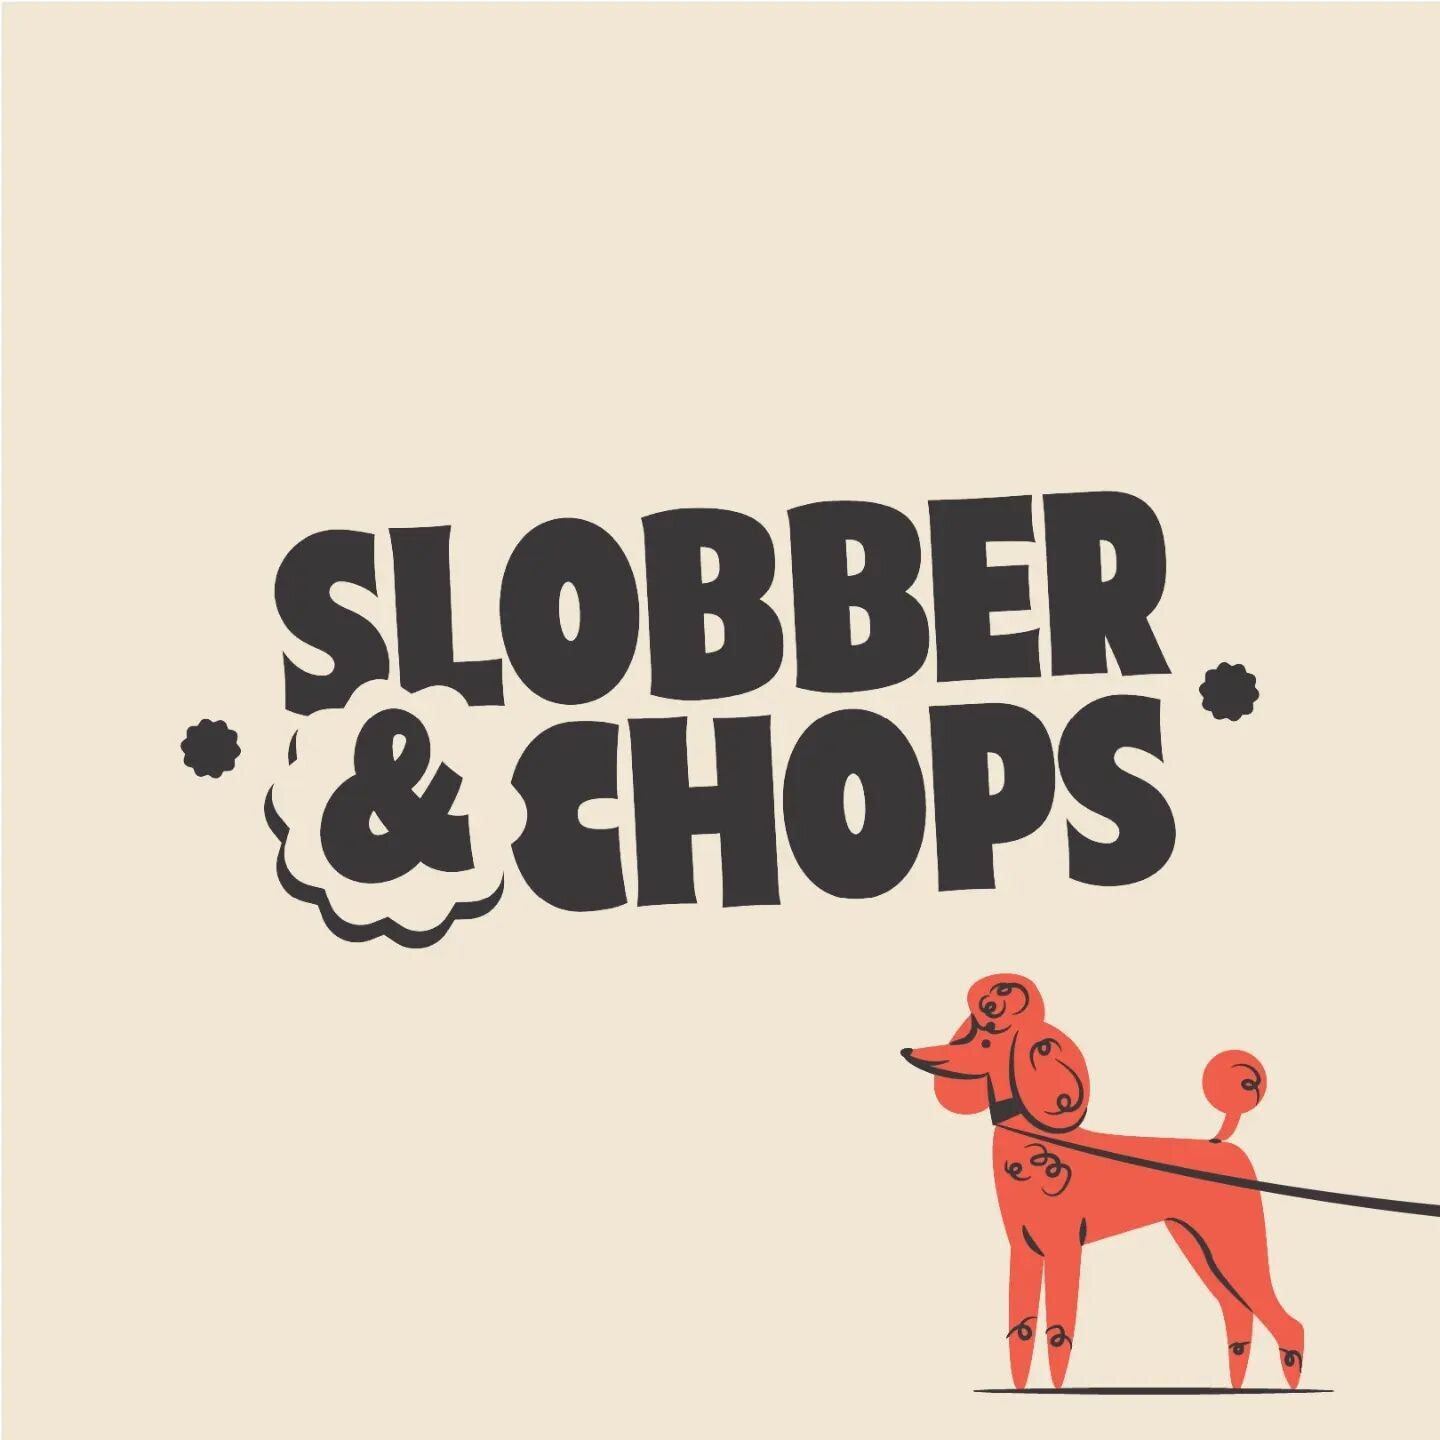 Brand design details for Slobber &amp; Chops 🐶

As part of my Signature brand package, I had the immense pleasure of working with Sally the owner behind Slobber &amp; Chops who allowed me to shape the brand from the ground up. What was really import